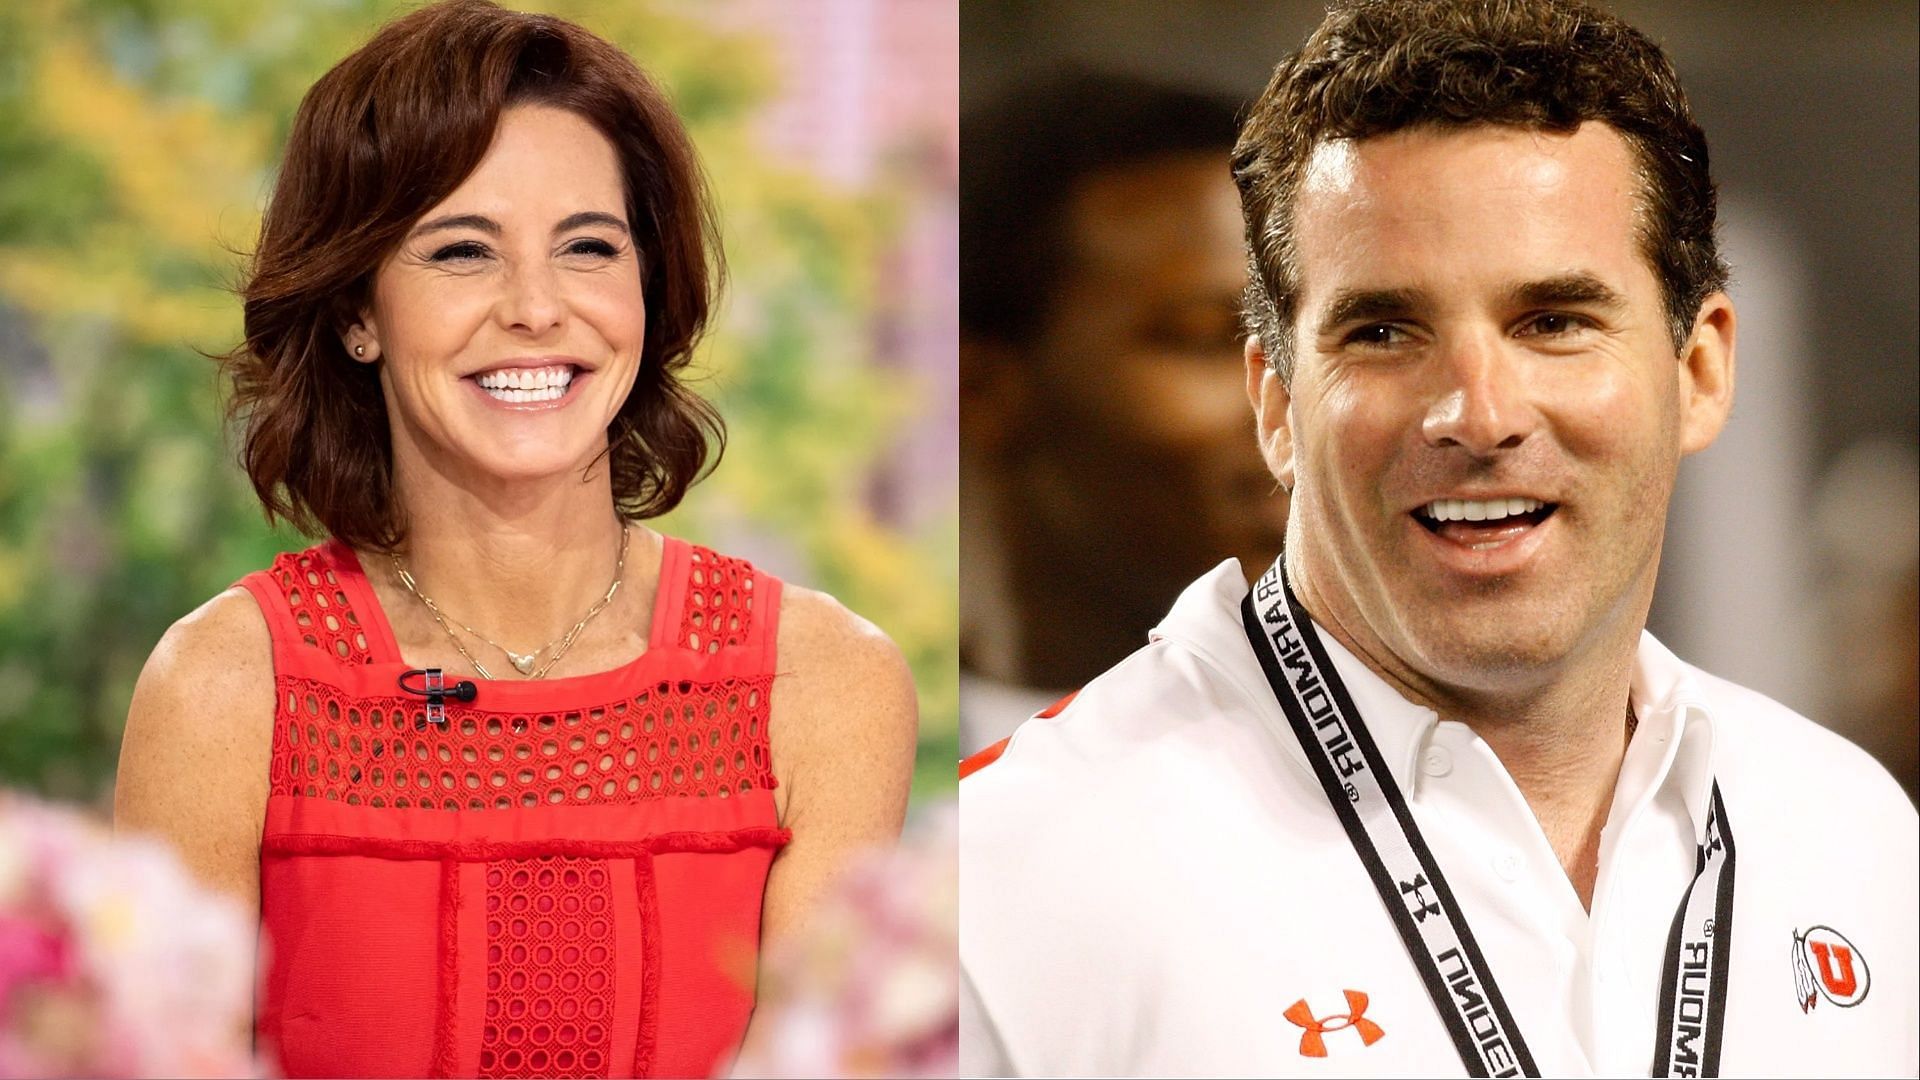 Stephanie Ruhle and Kevin Plank. (Photos via Getty Images)